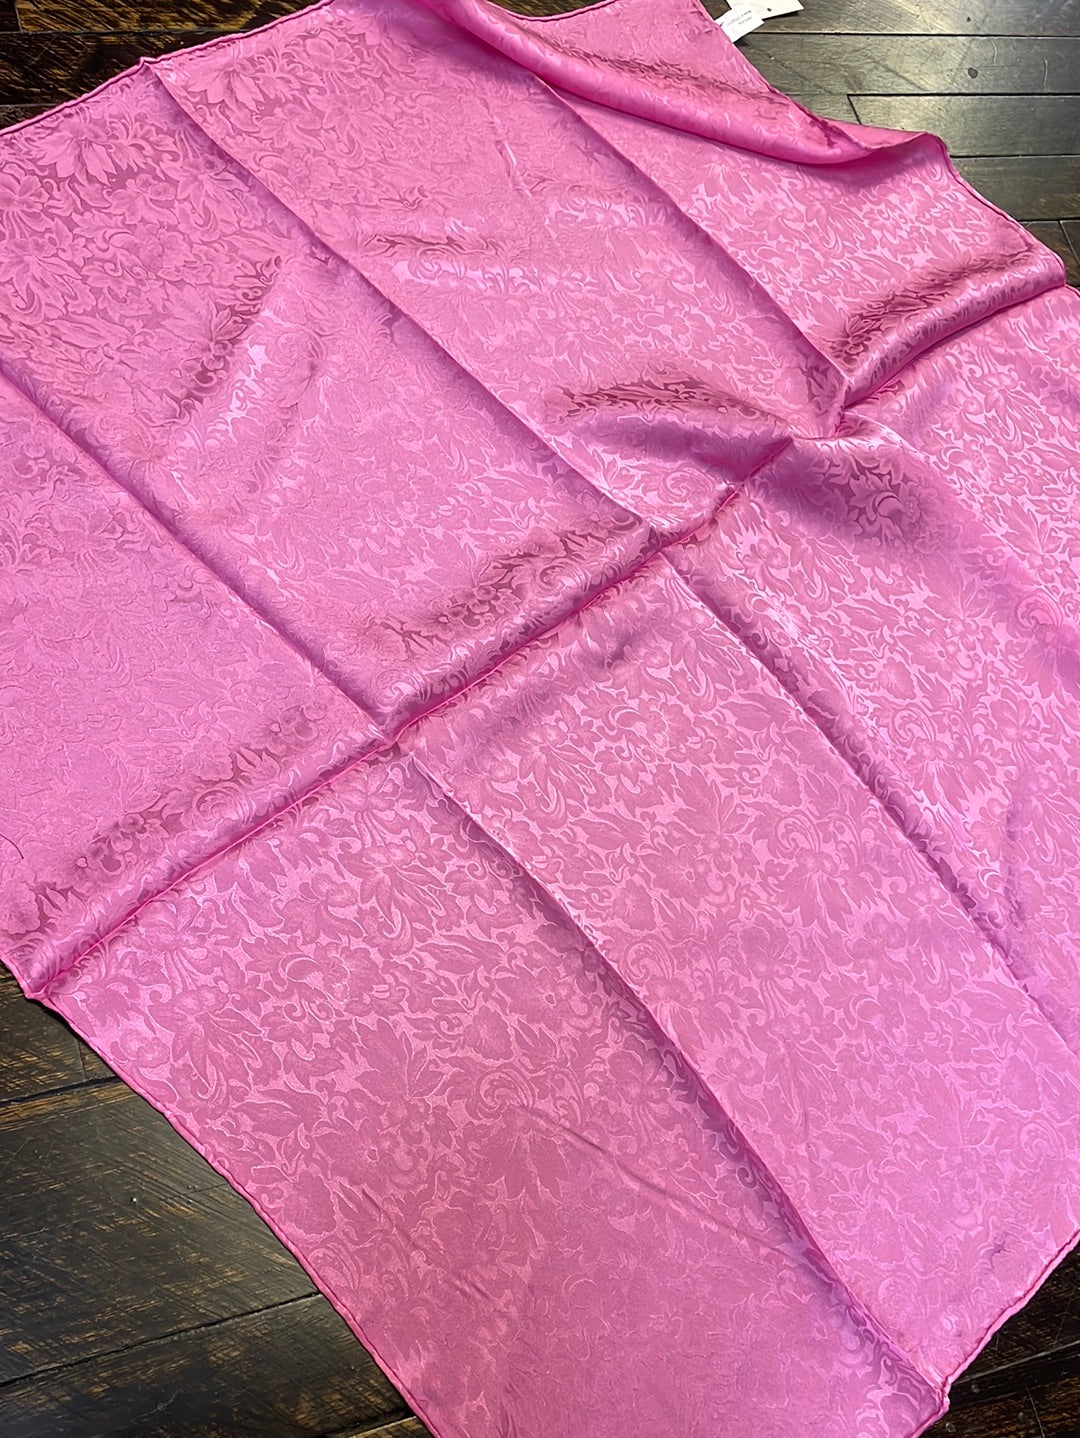 Etched Hot Pink Wild Rag - full size